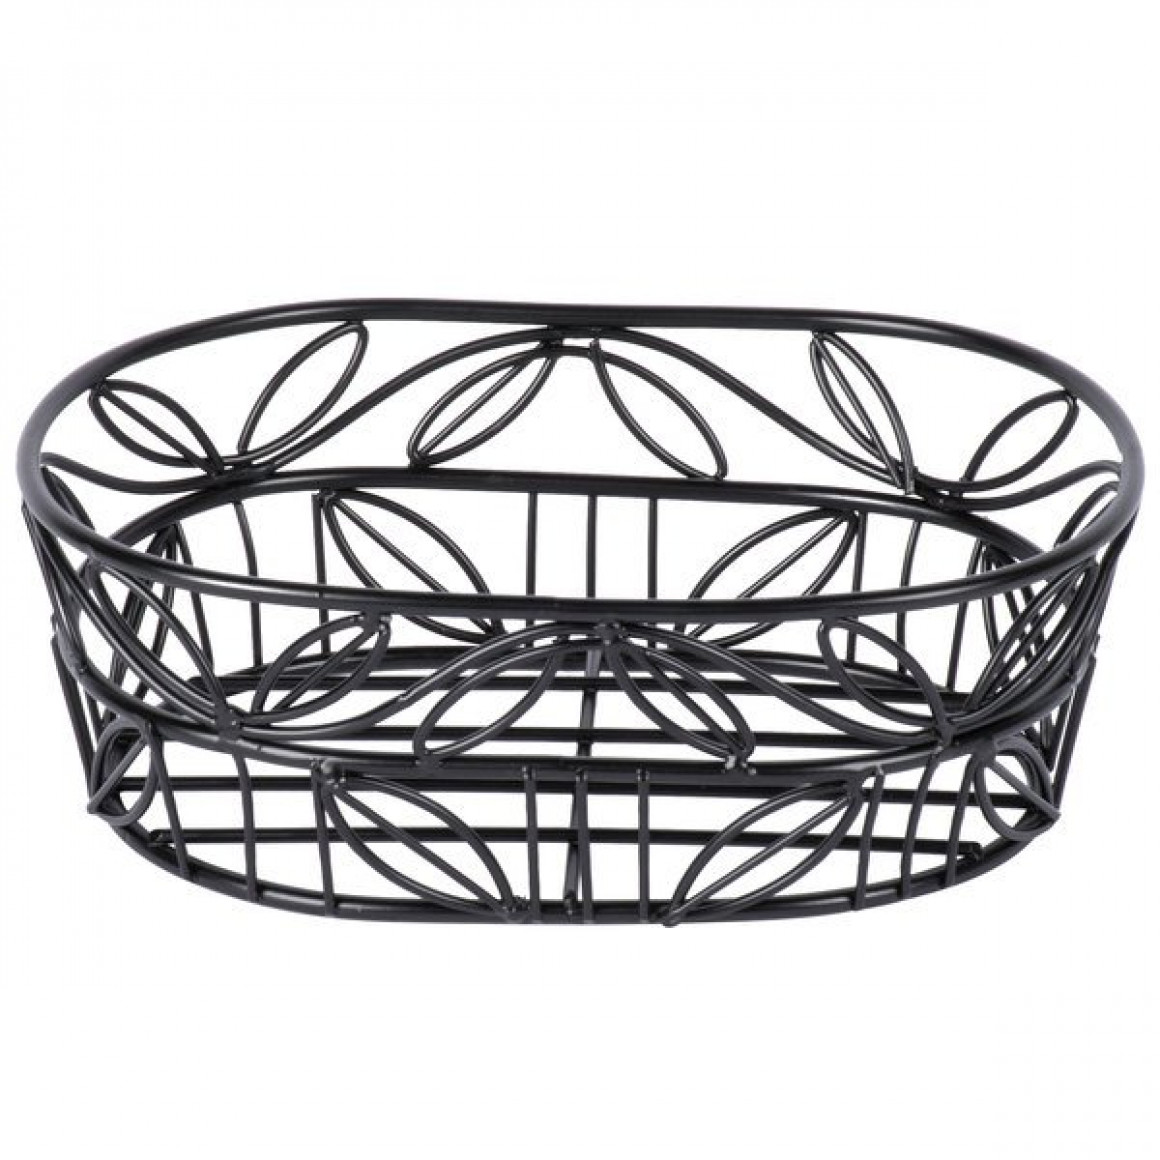 BREAD BASKET, WROUGHT IRON, OVAL, LEAF